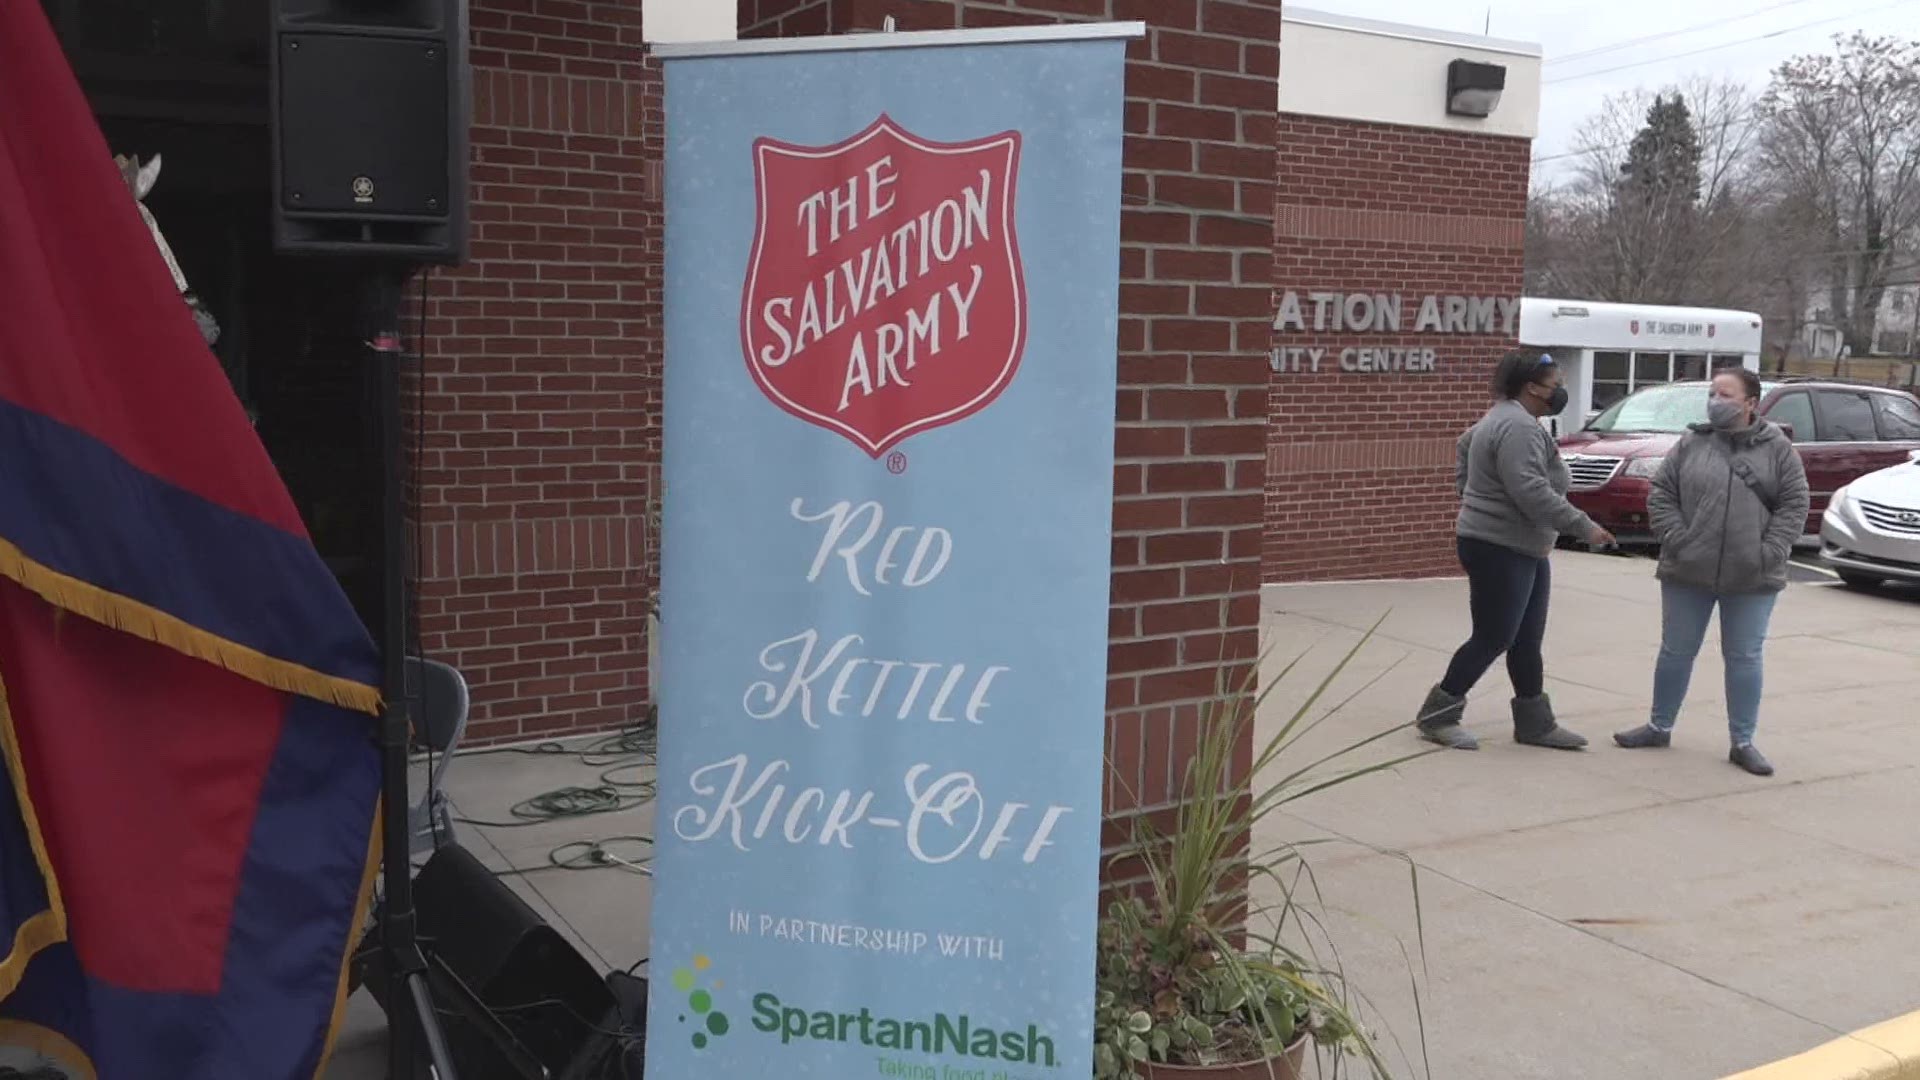 The Salvation Army's Red Kettle campaign kicked off Friday, Nov. 13. All the kettle stands are equipped with 'Kettle Pay' for contactless donations.